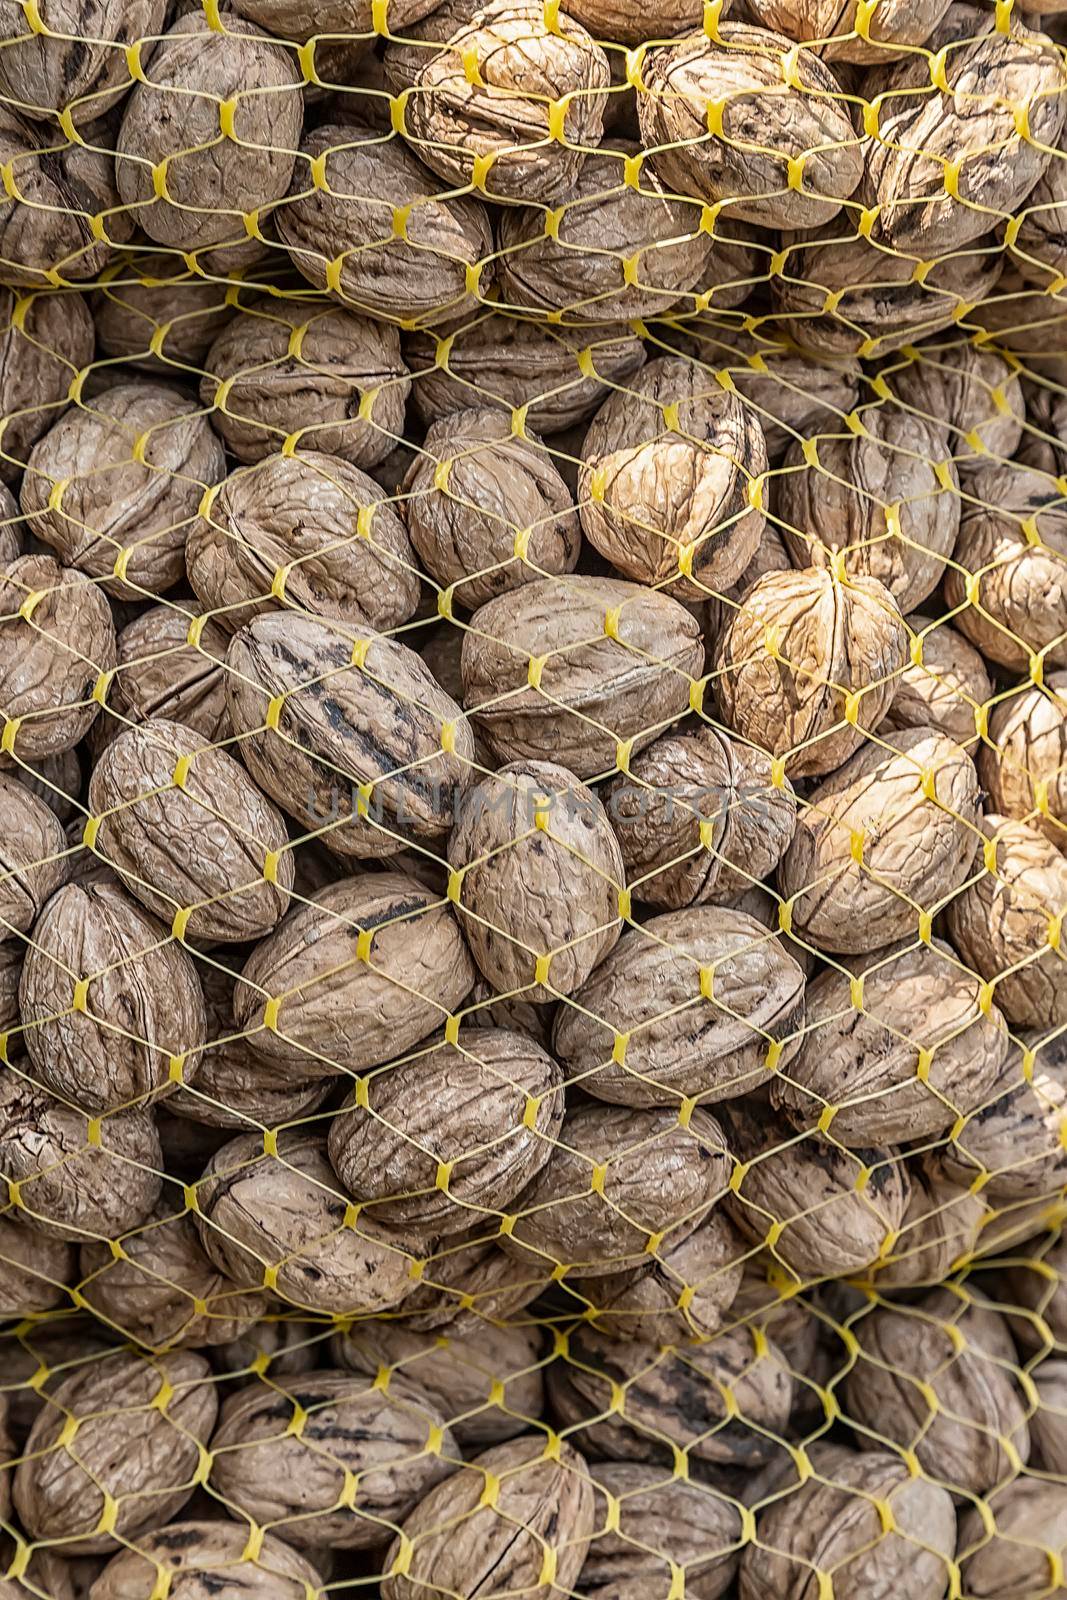 Lots of walnuts in a net bag at a market. Vertical view